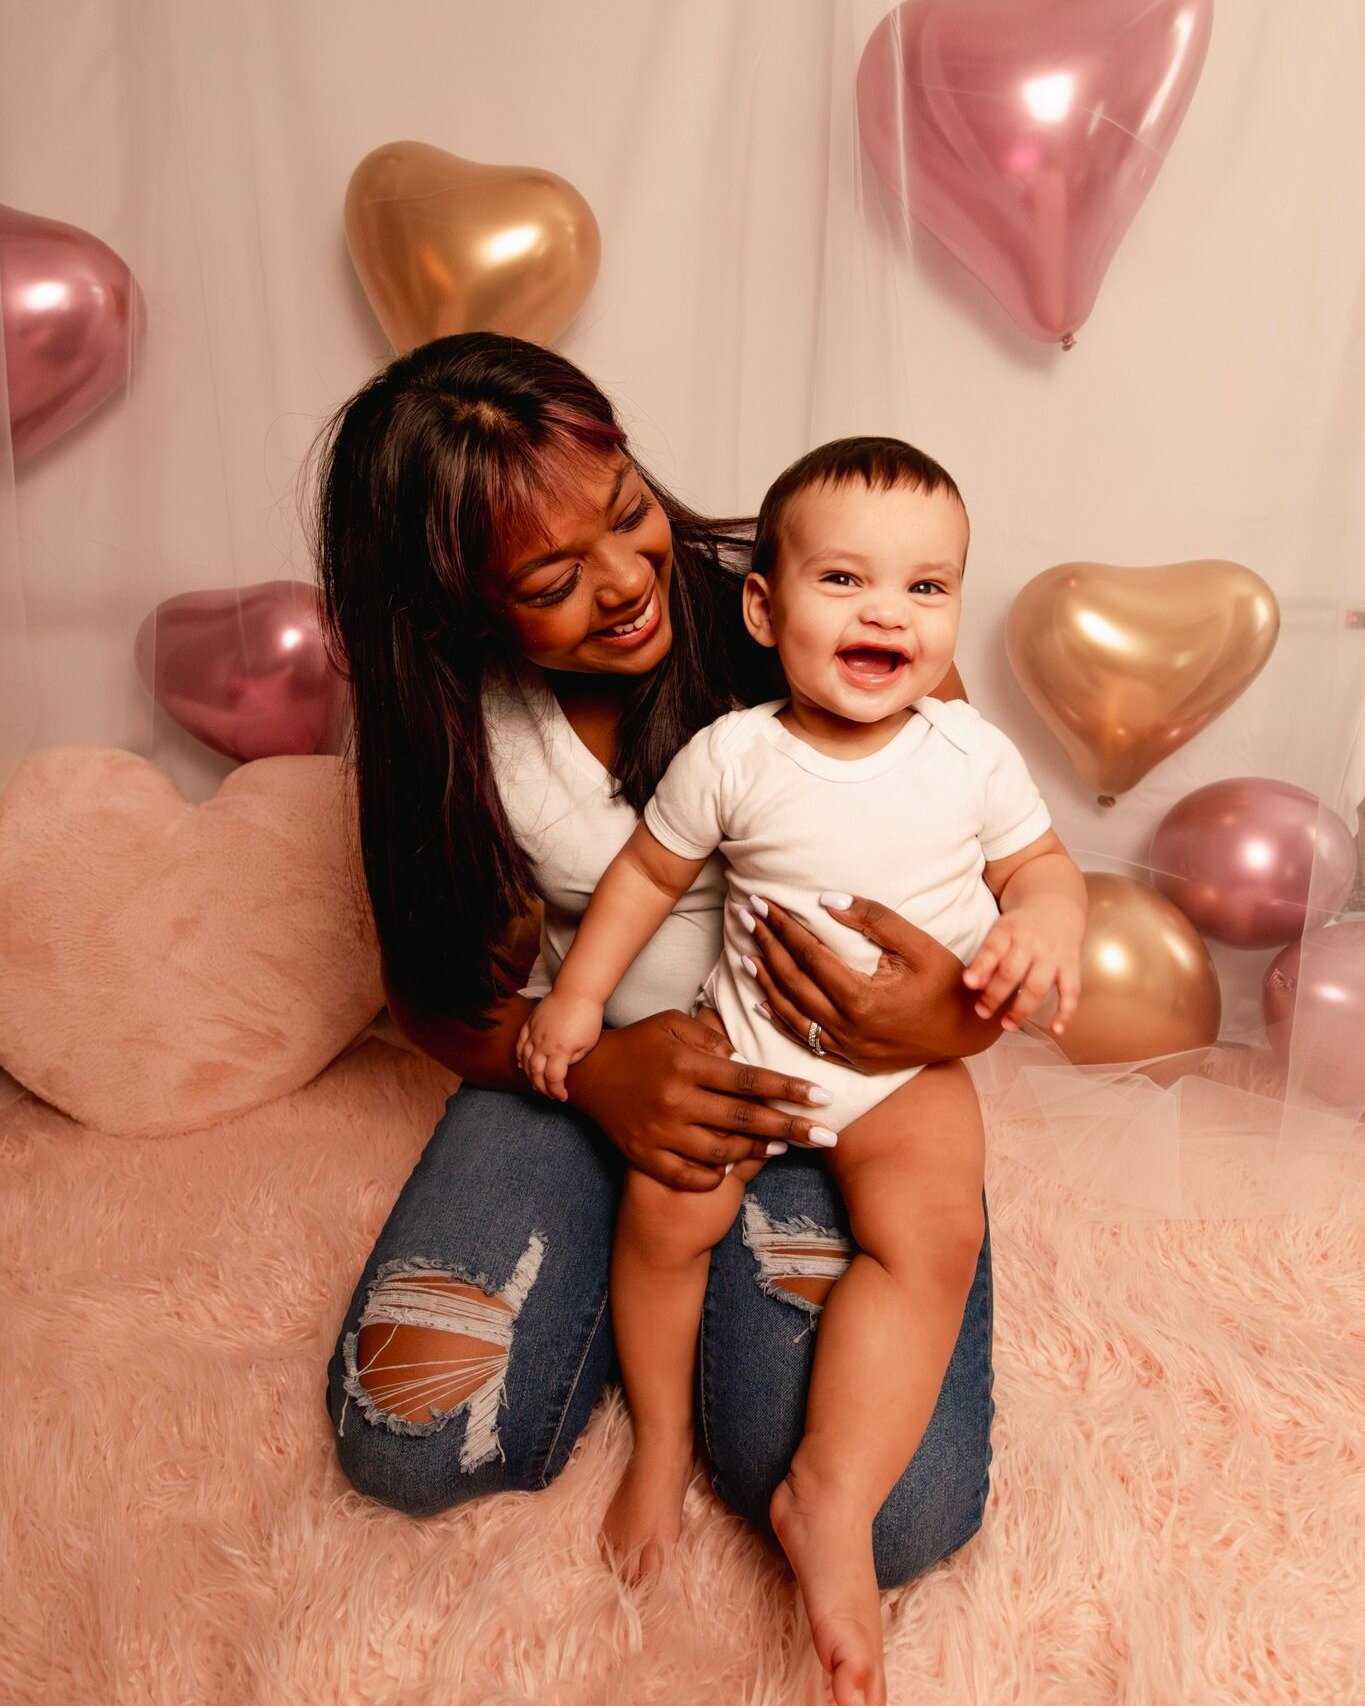 Love is in the air! 💖✨ This year, I had the privilege of photographing the sweetest session with this incredible mom and her adorable son. Every click of the shutter felt like freezing time, preserving the love and joy they share. 📸💕 Wishing every